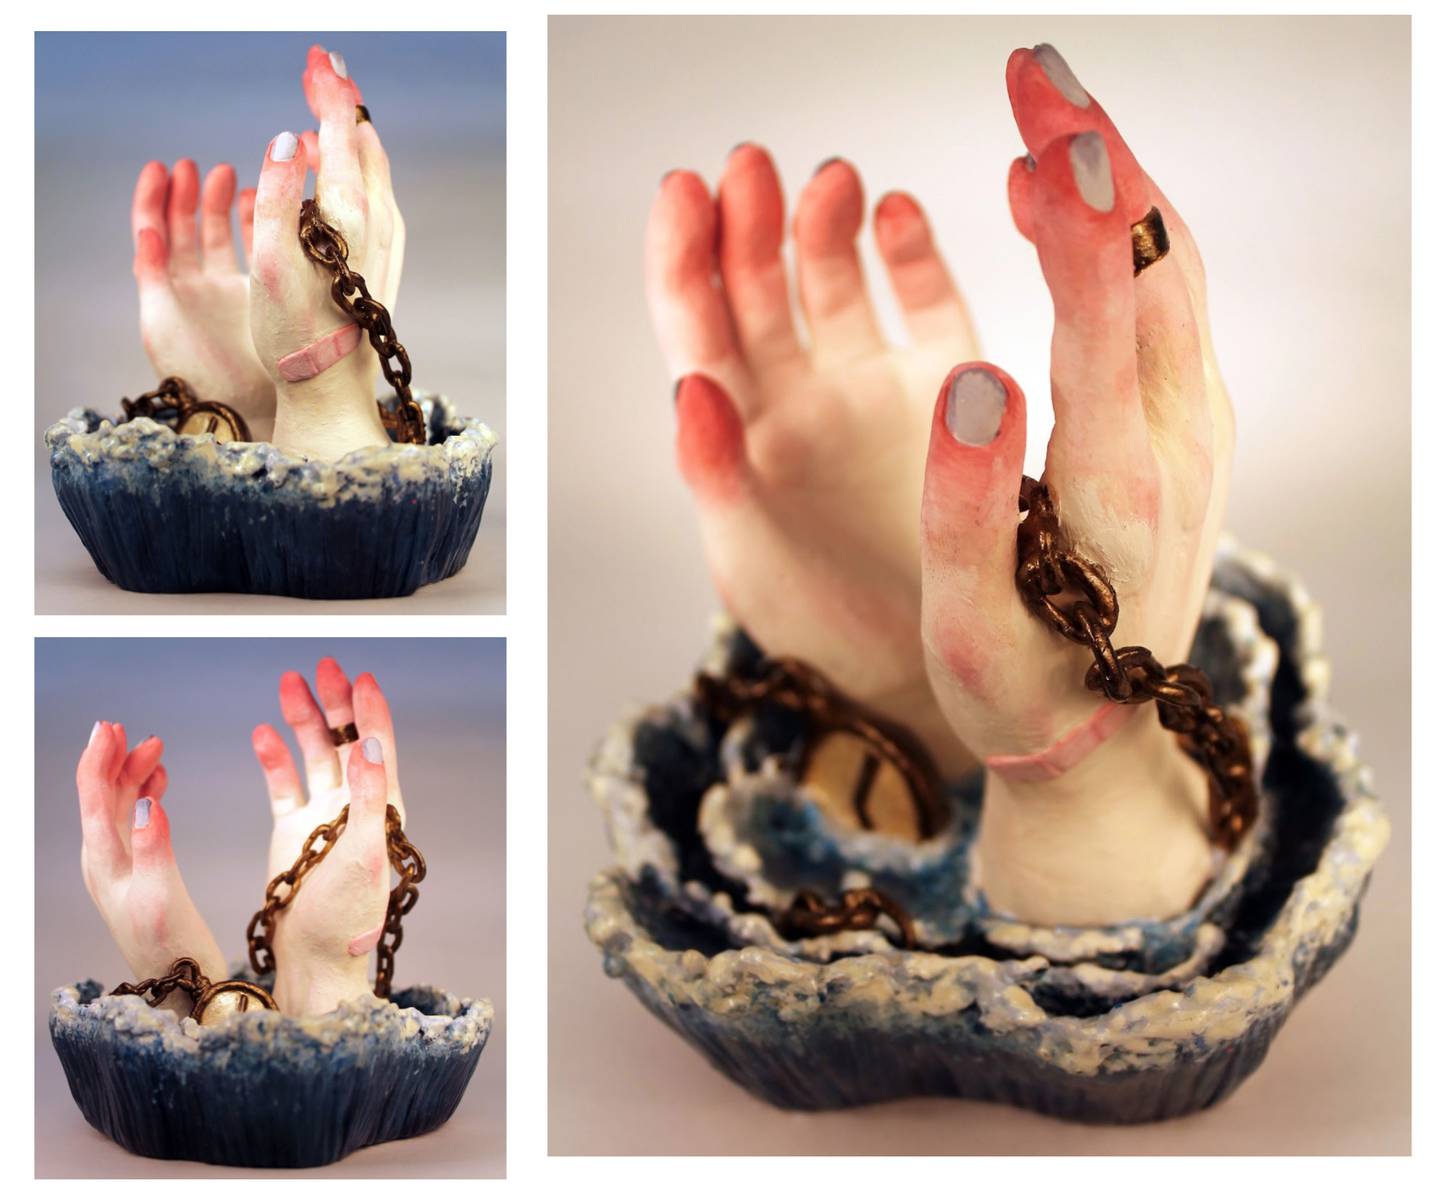 Vivianne Angulo, a senior at Plainfield South High School, earned a gold award from Scholastic Art & Writing Awards for her ceramics and glass piece called “Drowning in Time."